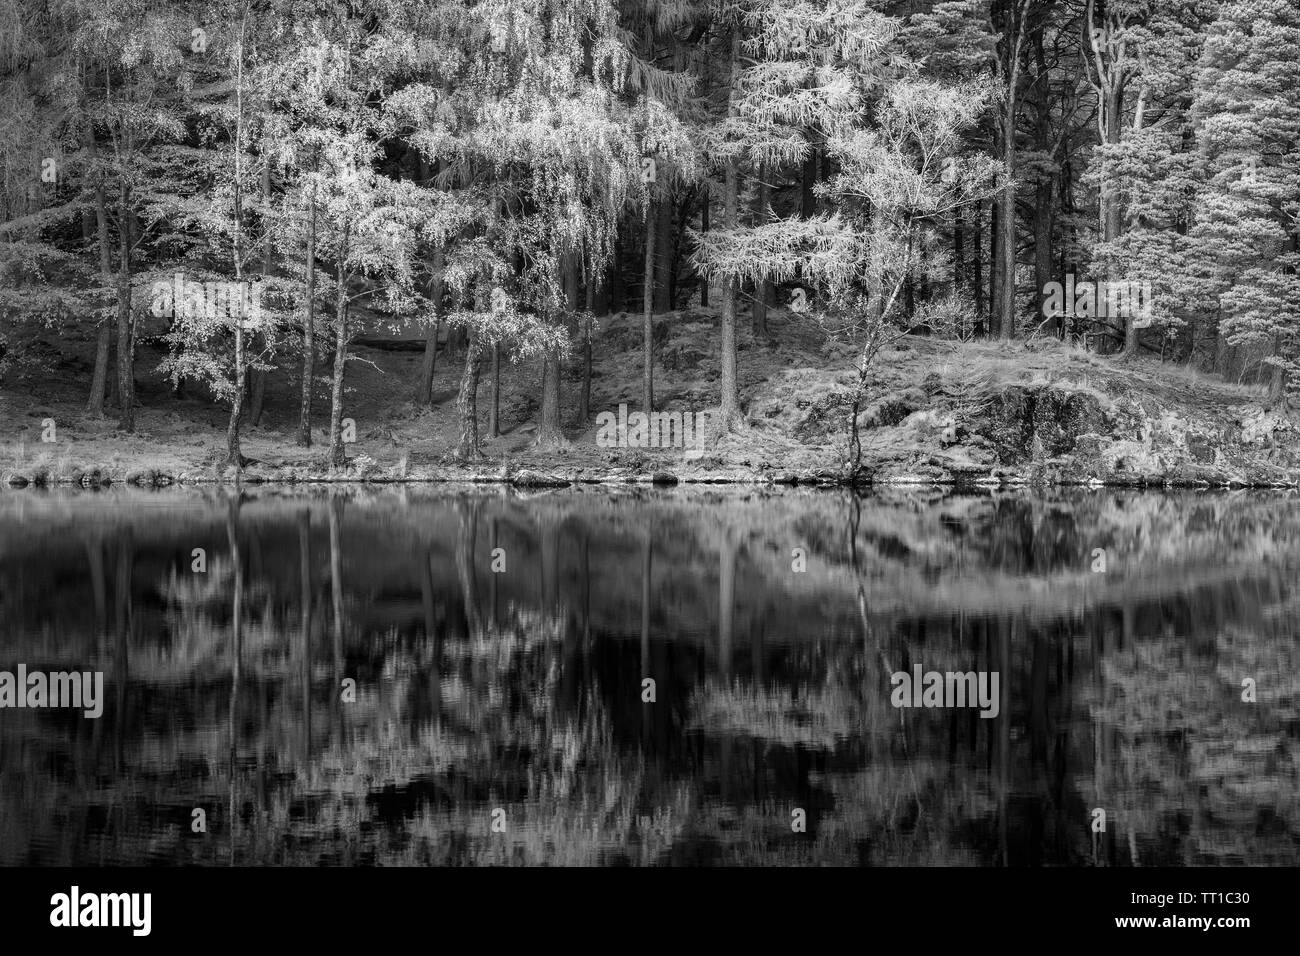 Infra red monochrome image of reflections in Blea Tarn in the Lake District, England on a still and sunny autumn day Stock Photo